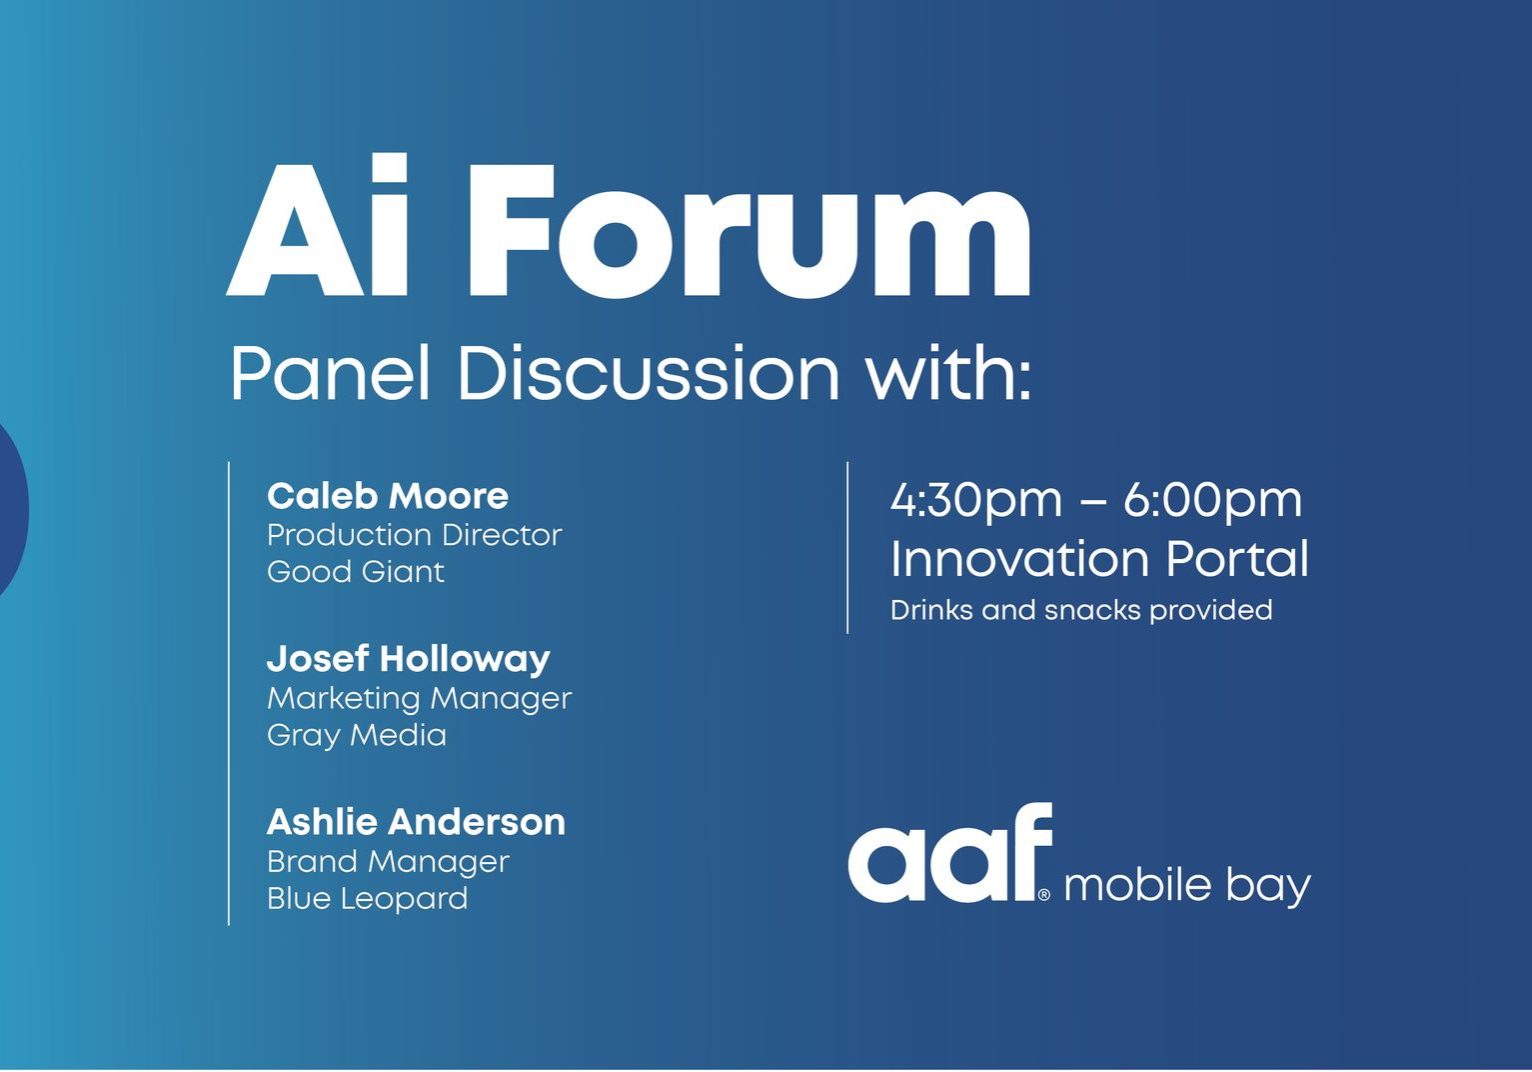 AAF MOBILE BAY TO HOLD FORUM ON AI